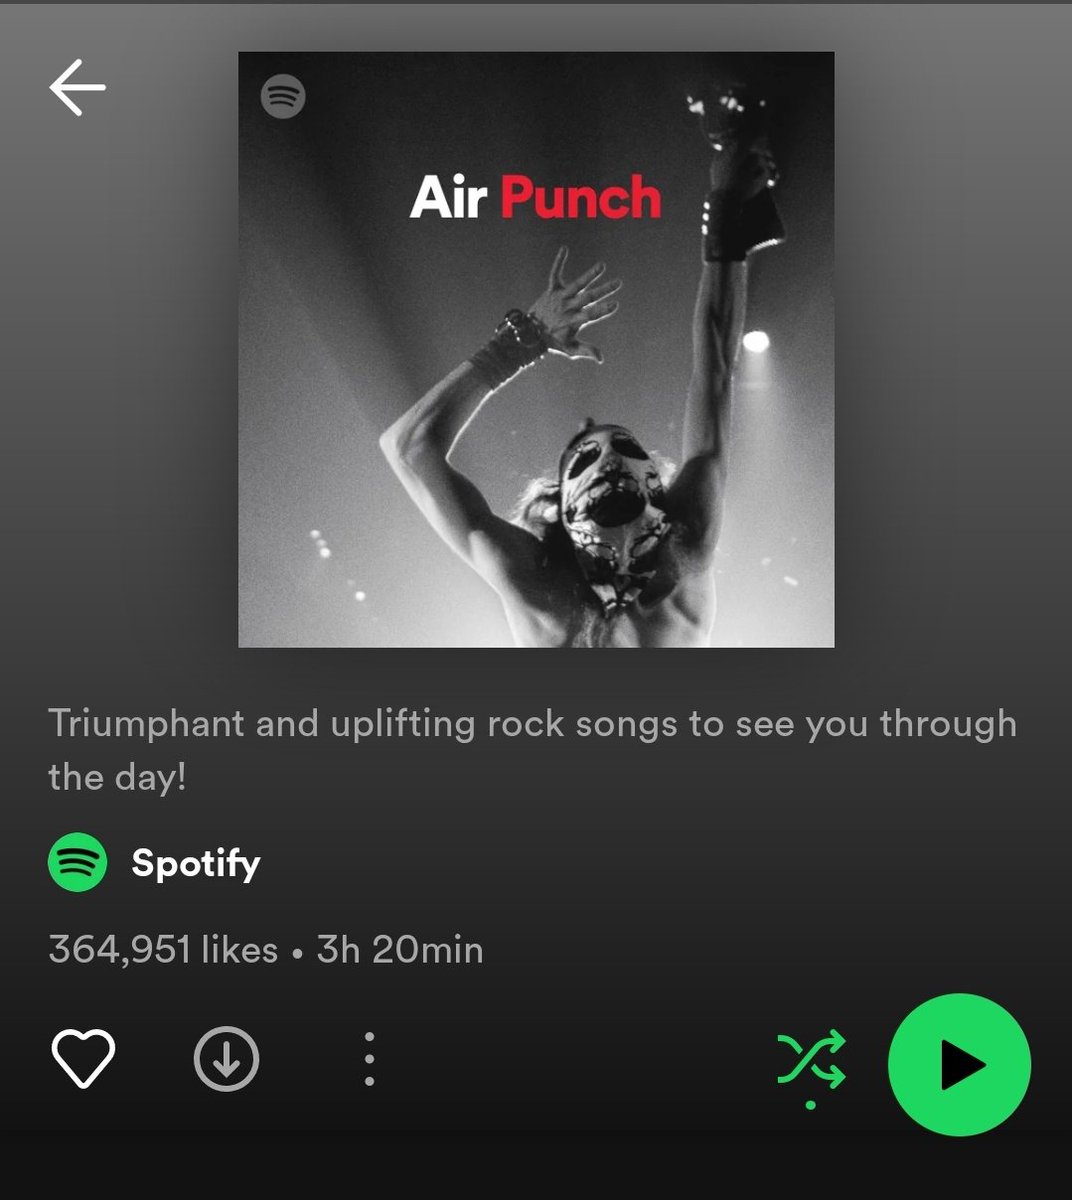 Music taste... I've always claimed that my taste is hip, happening and (my favourite word) 'eclectic' but @SpotifyUK seems to have other ideas... #AirPunch. #vintage or #oldschool?